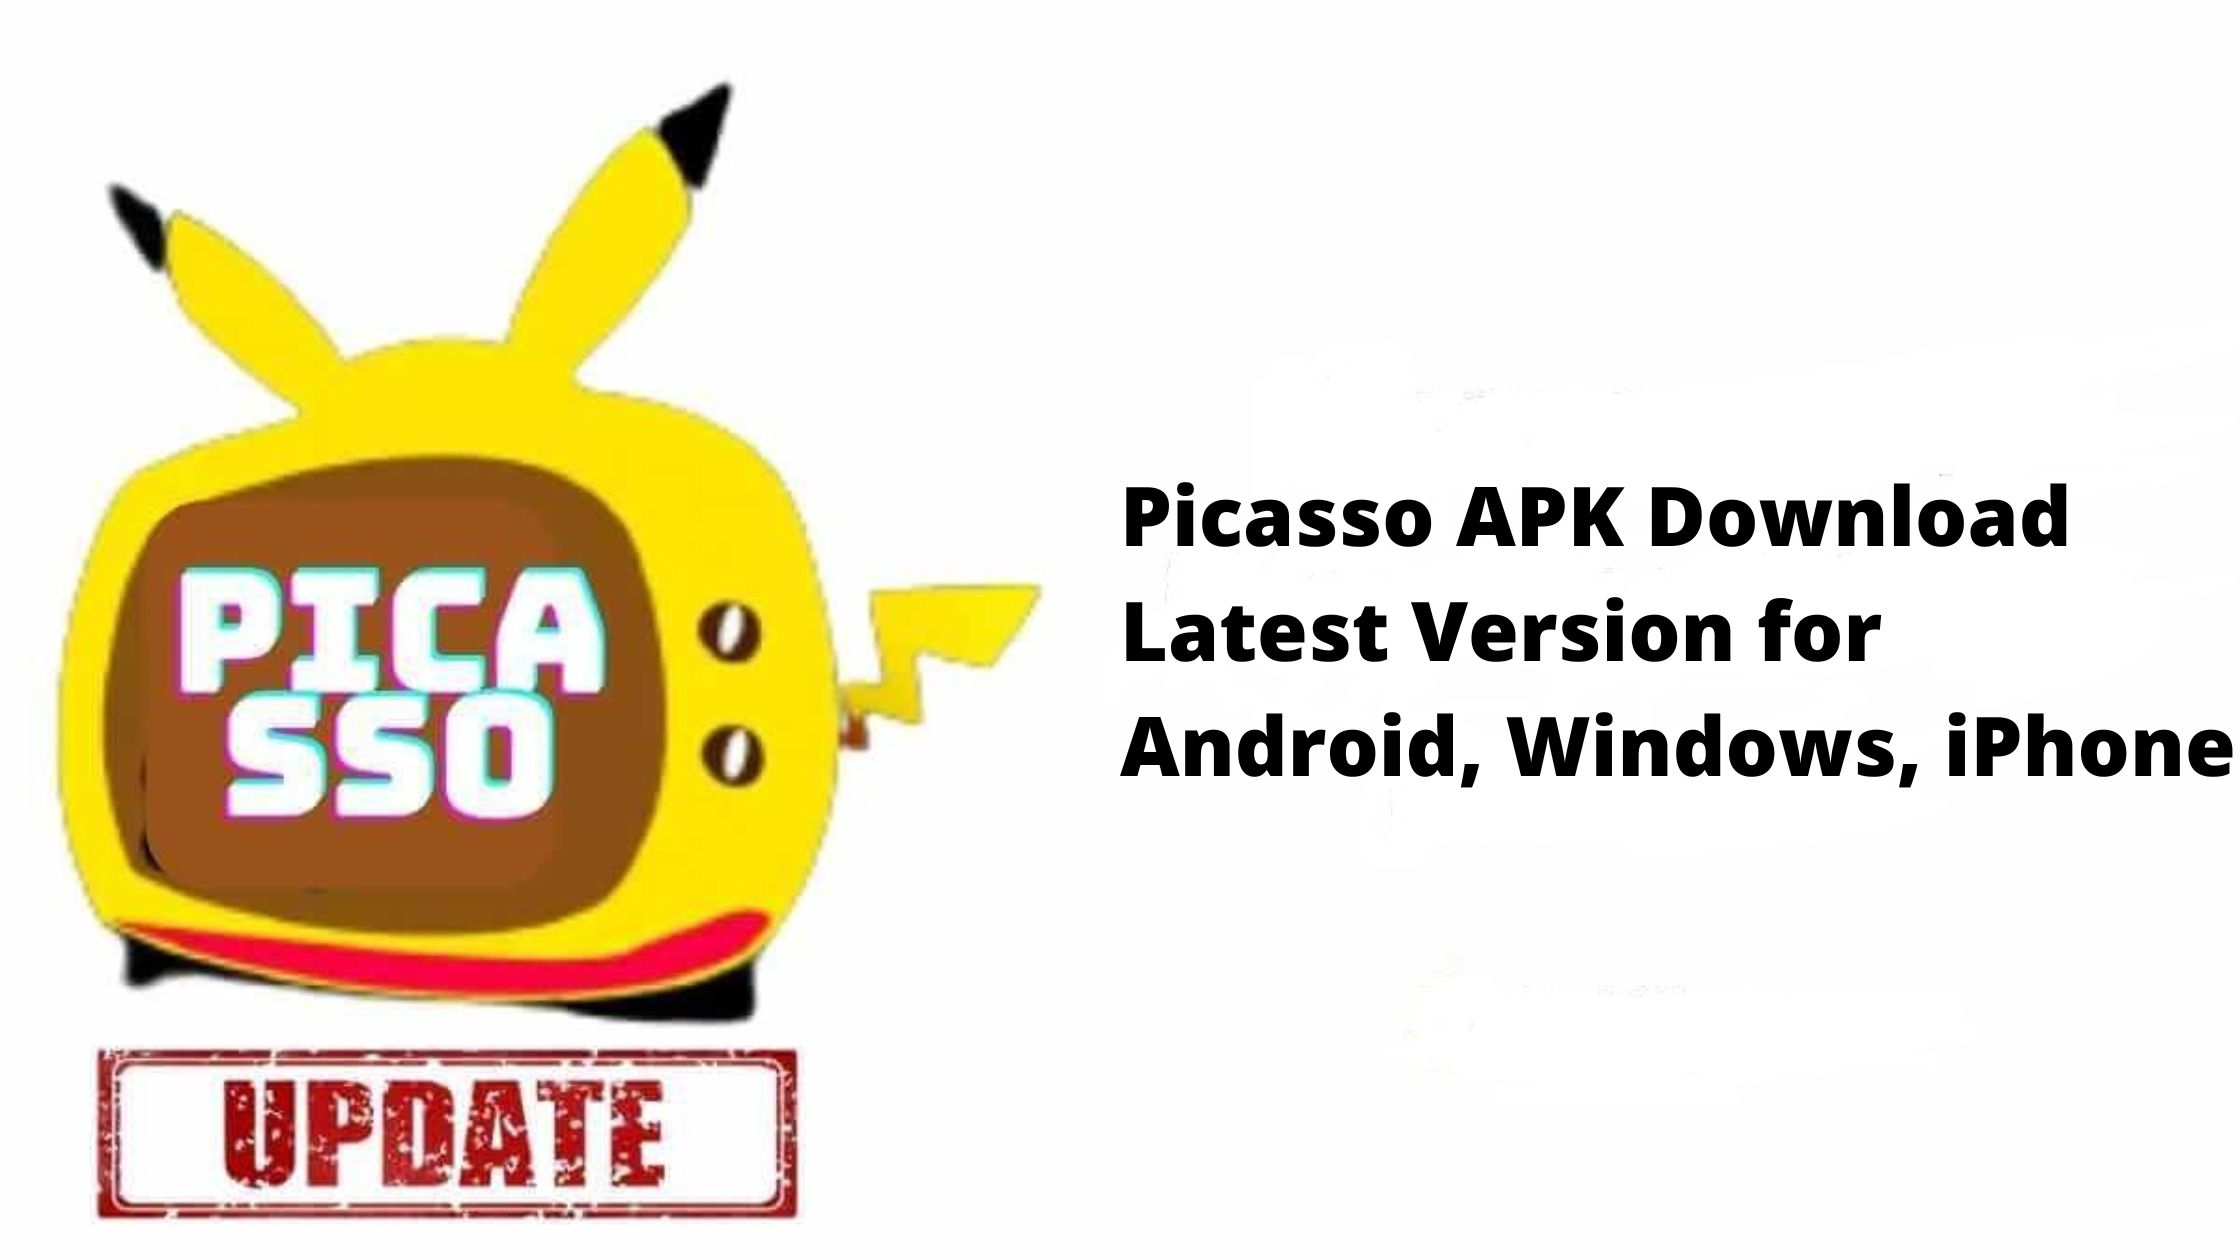 Picasso APK Download Latest Version for Android, Windows, iPhone